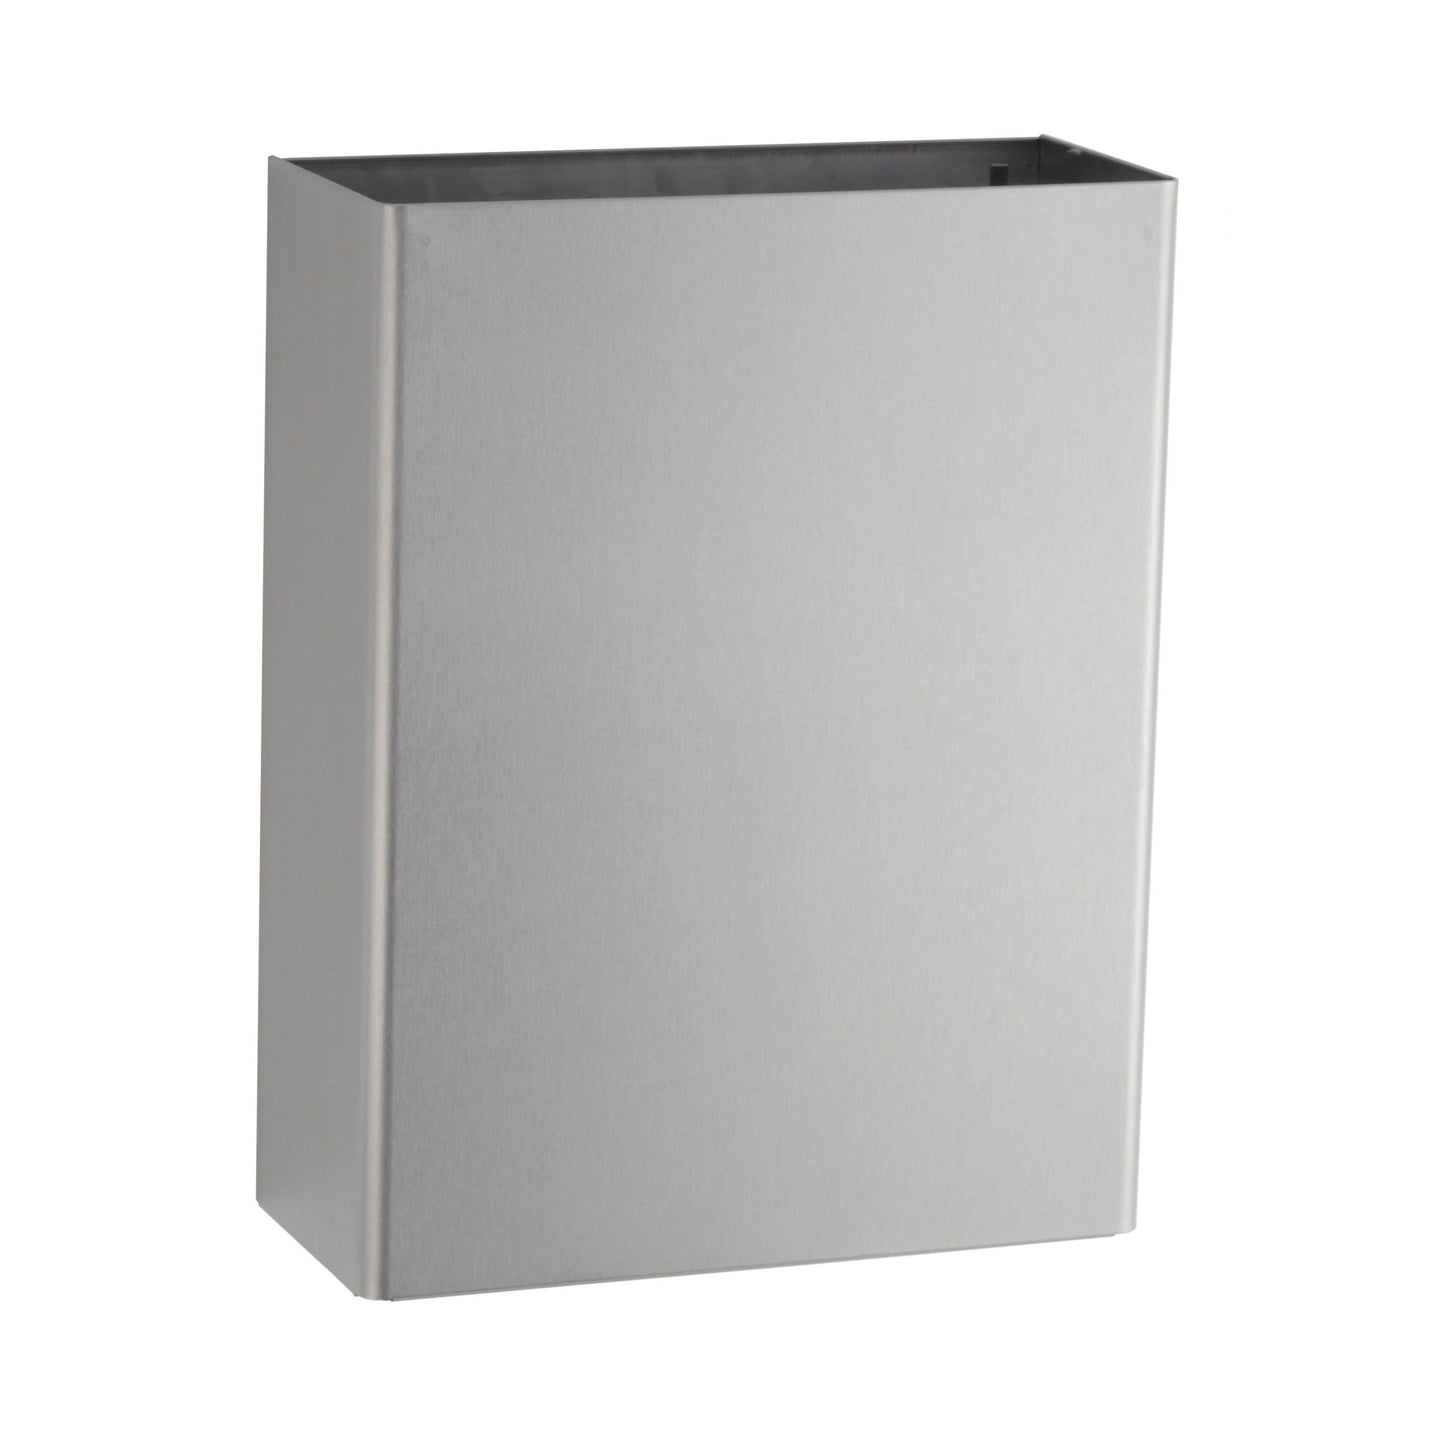 Bobrick 279 - ConturaSeries Surface Mounted Waste Receptacle in Satin Stainless Steel